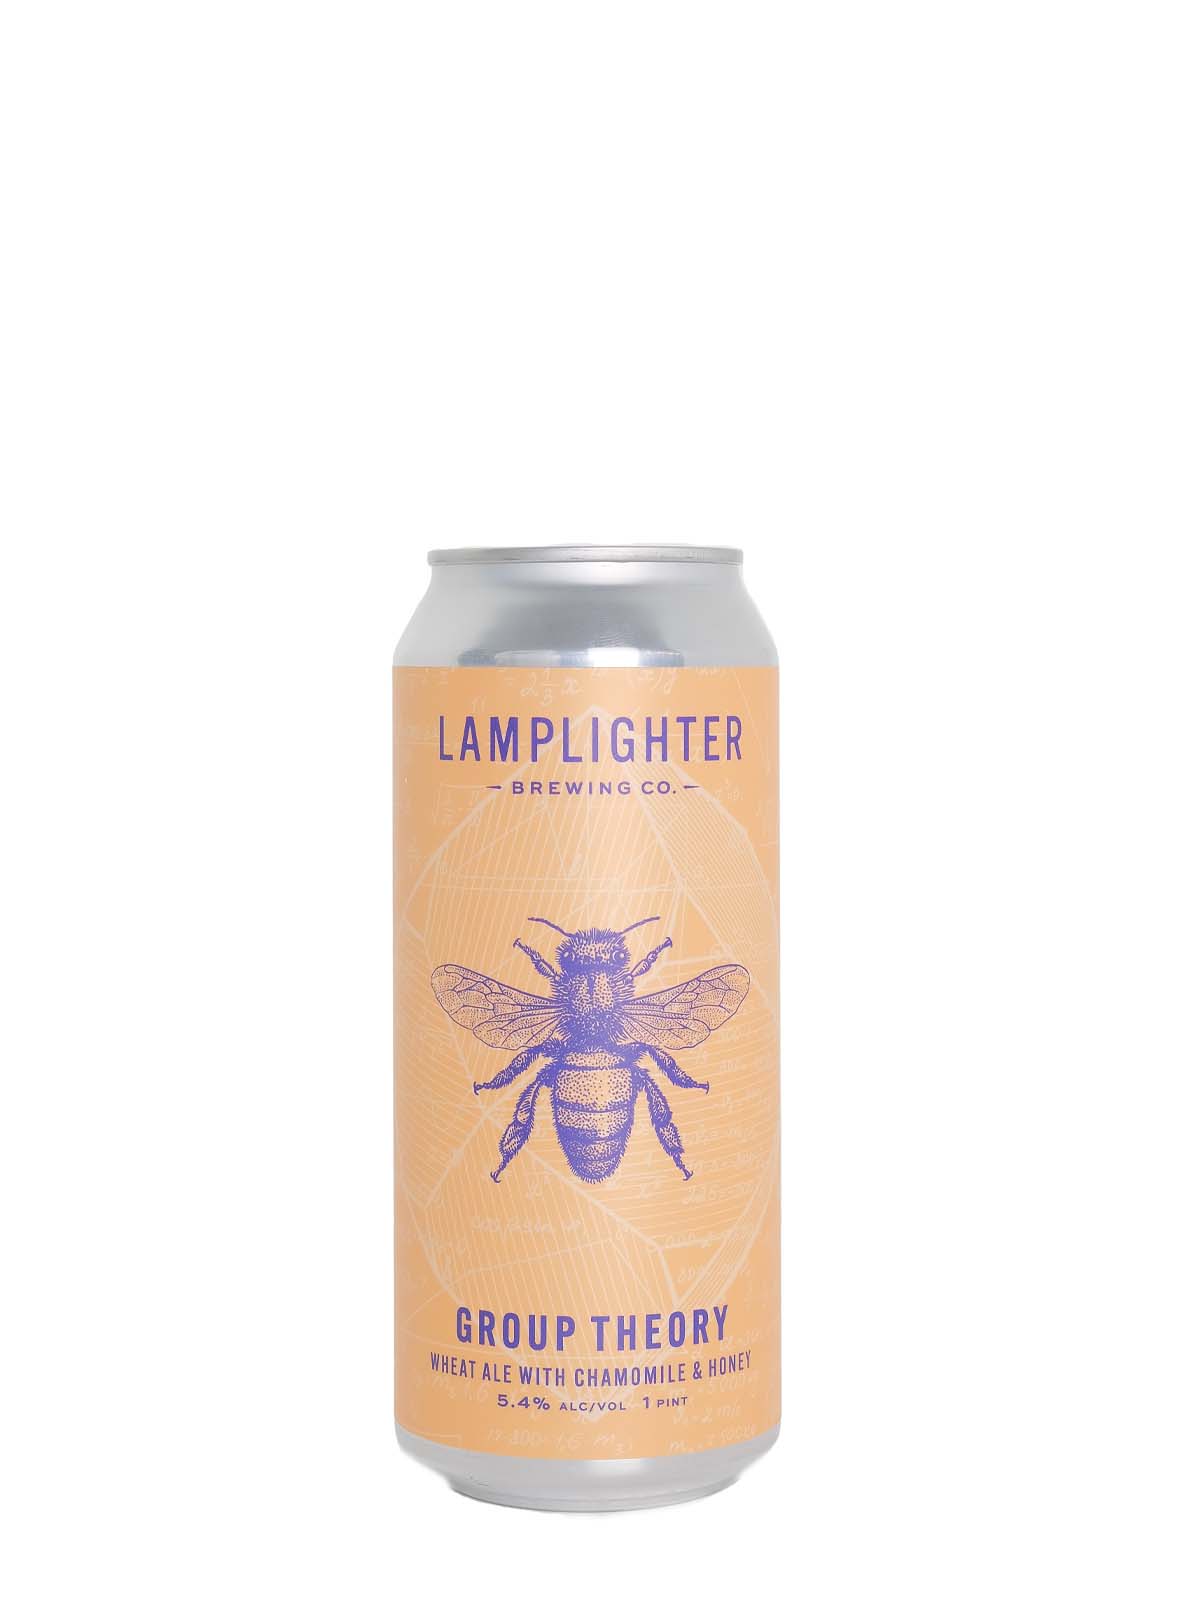 Lamplighter "Group Theory" Wheat Ale with Camomile and Honey (Somerville, MA)